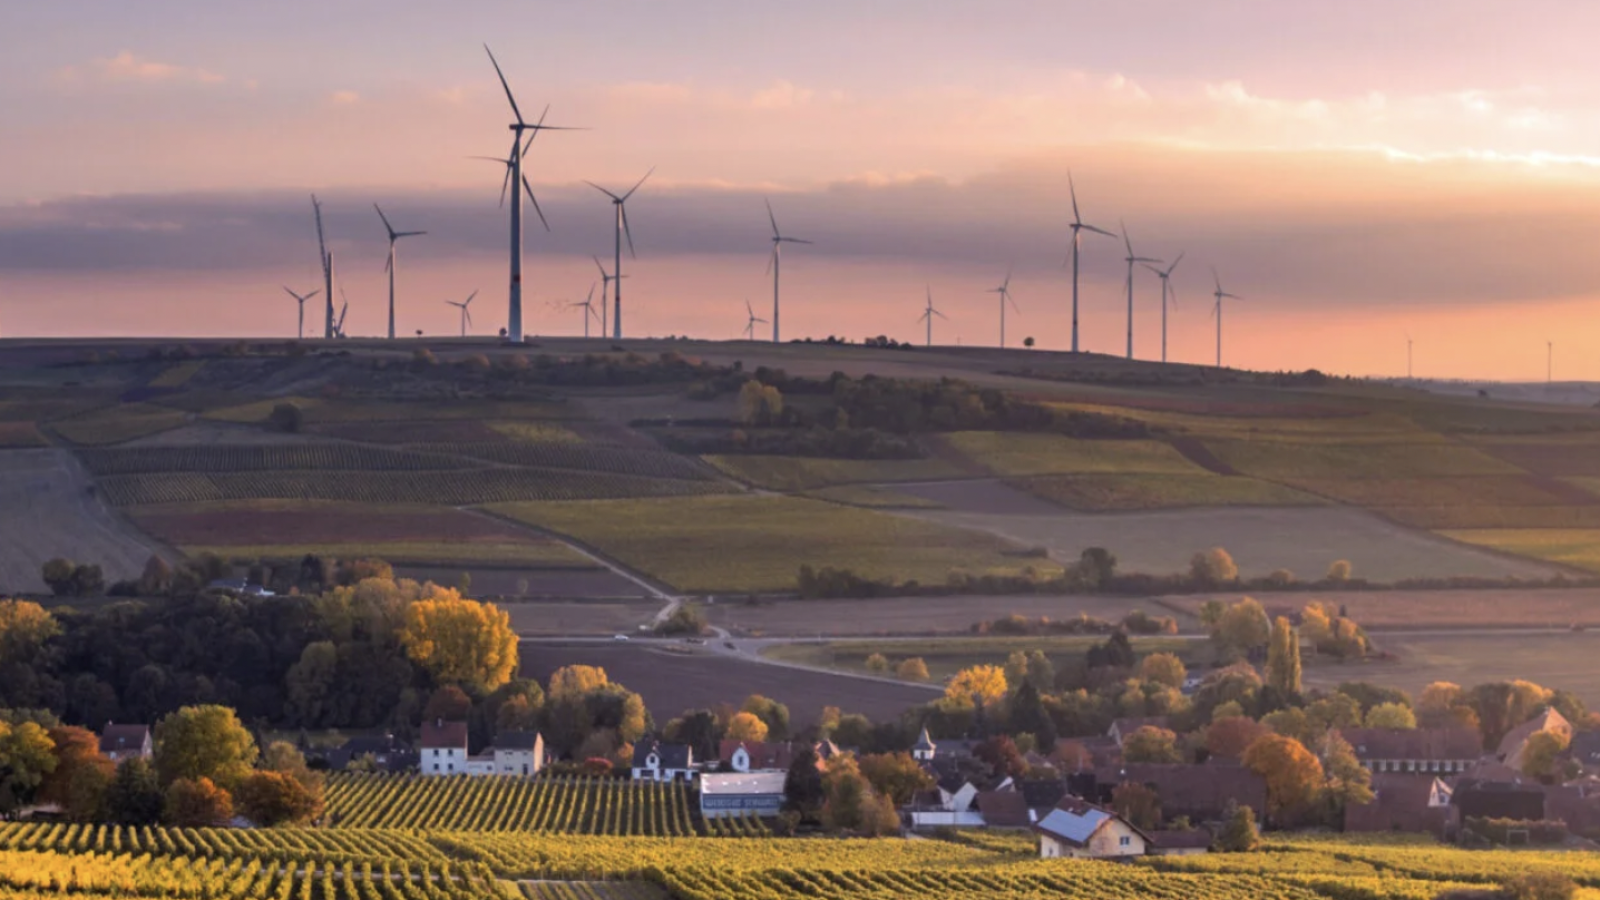 Landscape with green trees, wind turbines and a sunrise over a foothill